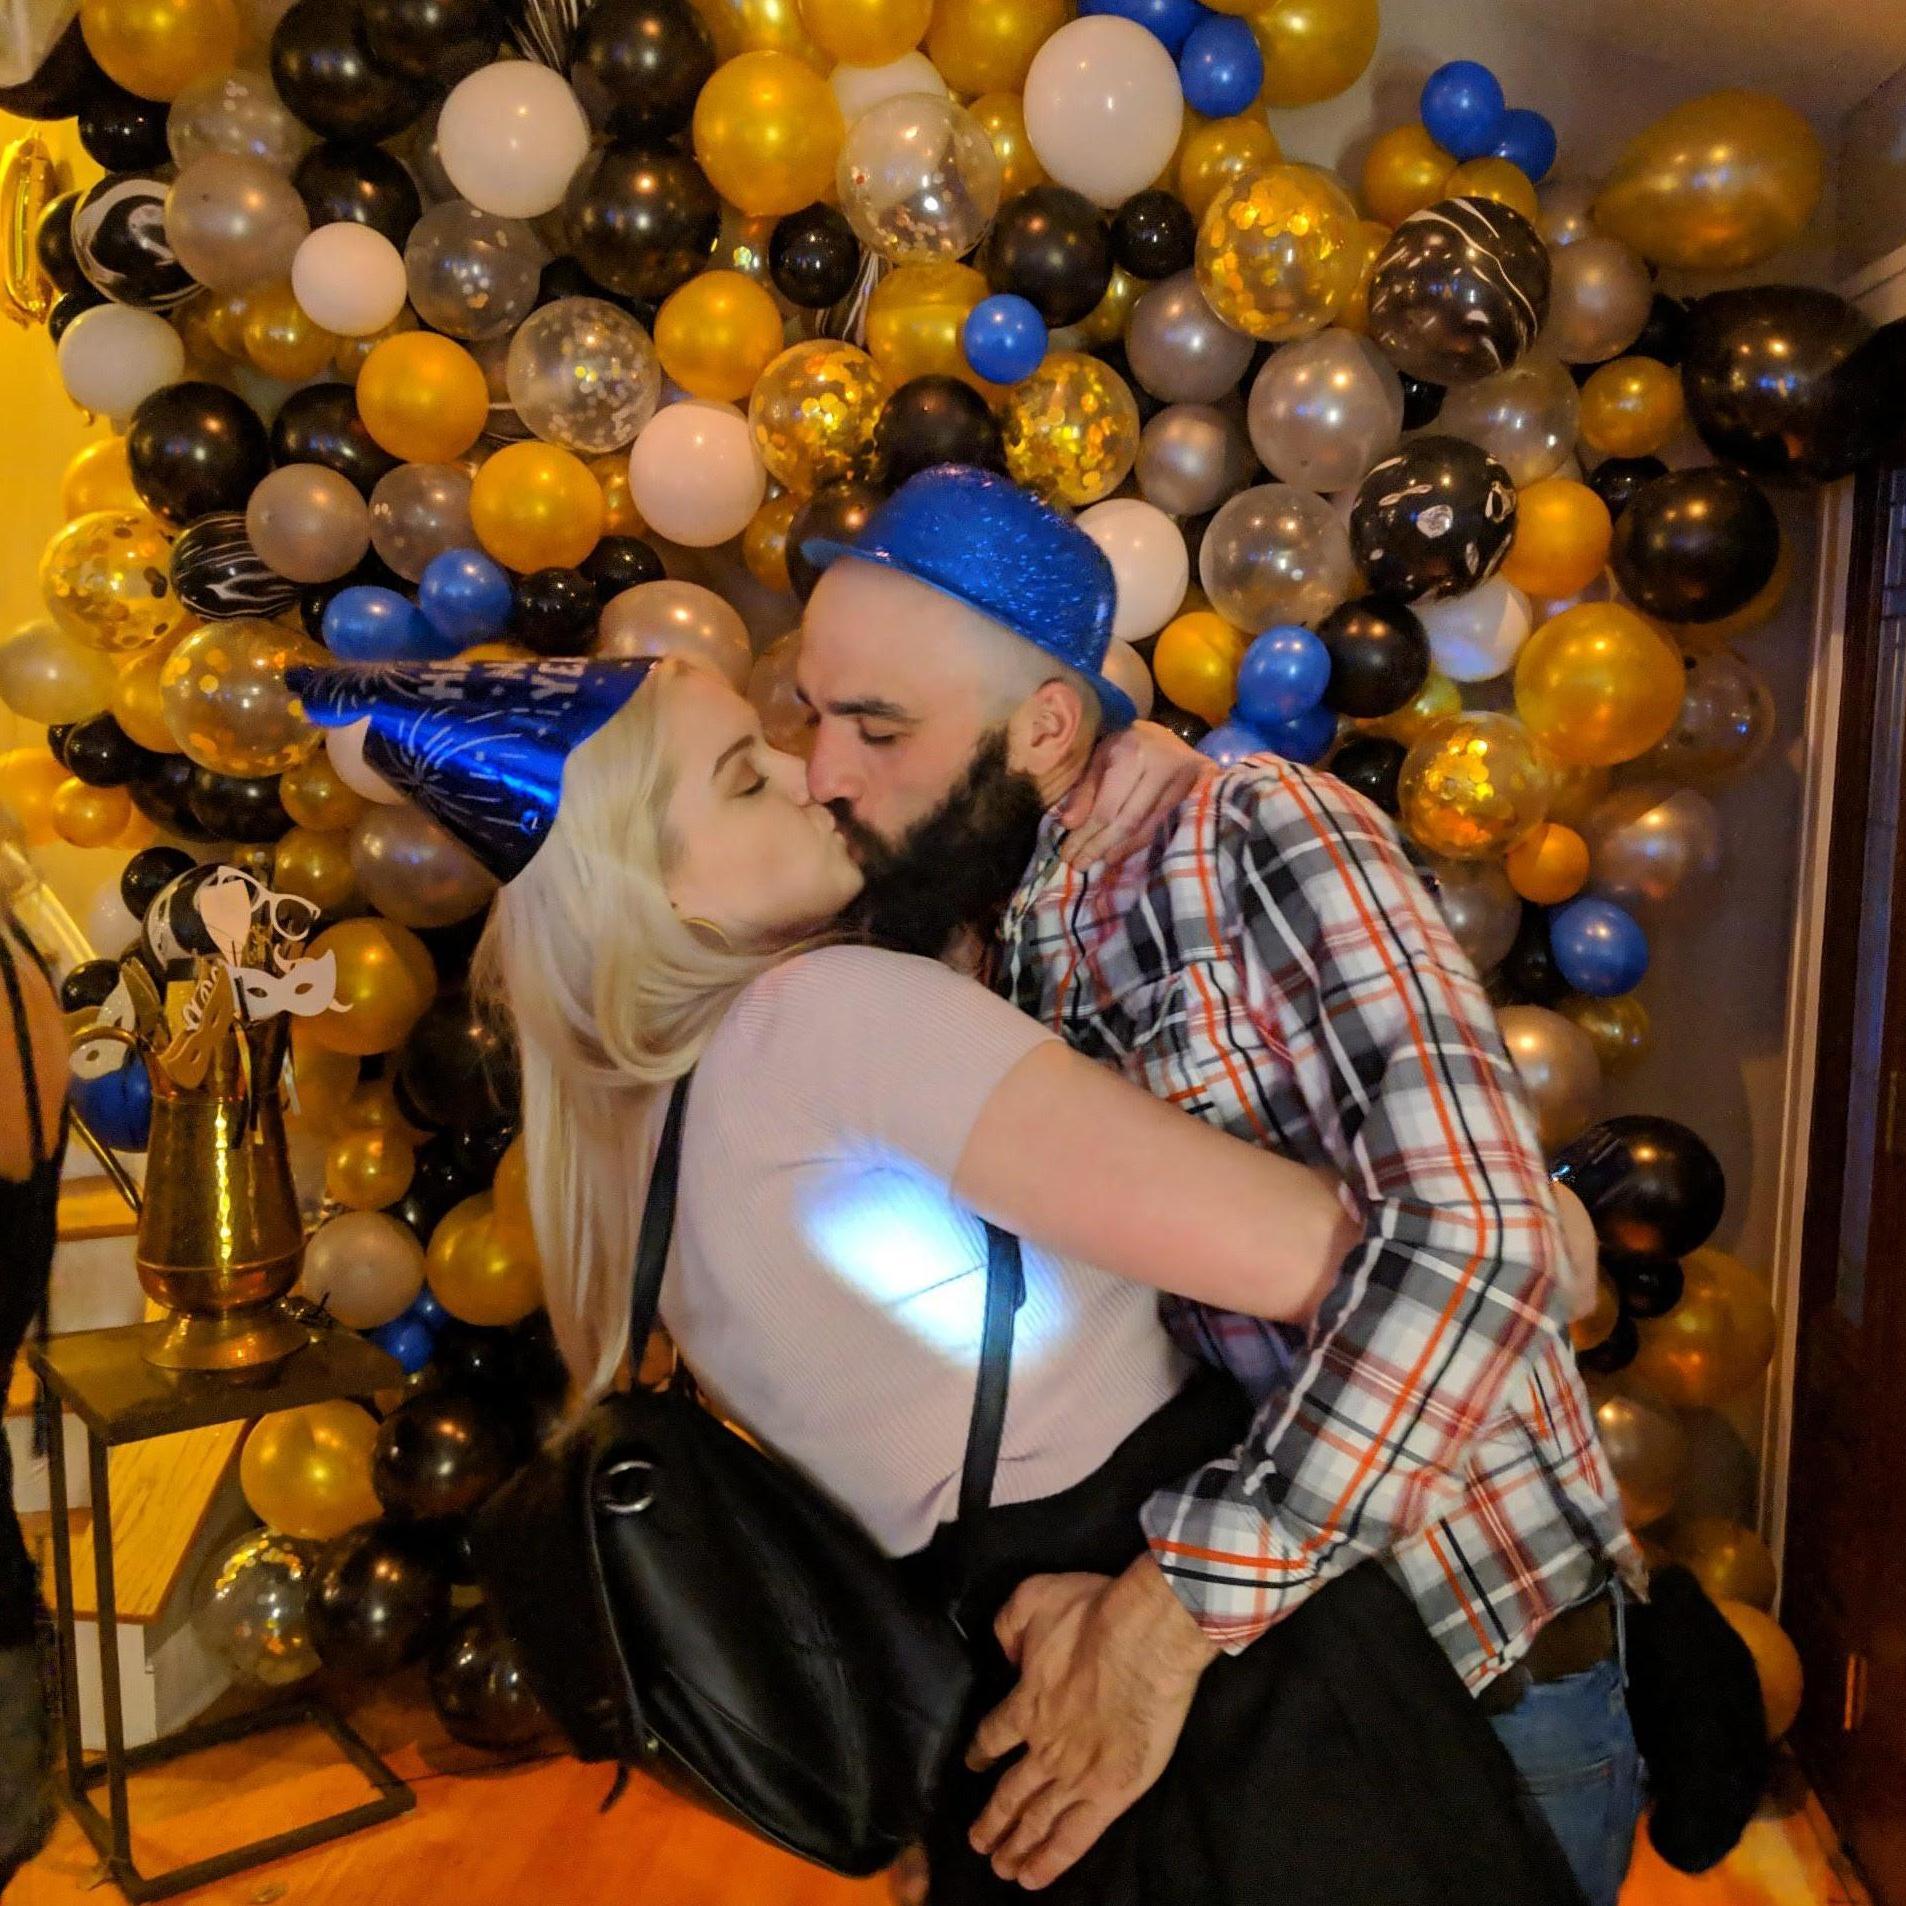 The first anniversary on New Years. The couple found love while celebrating New Years Eve with friends in 2018.